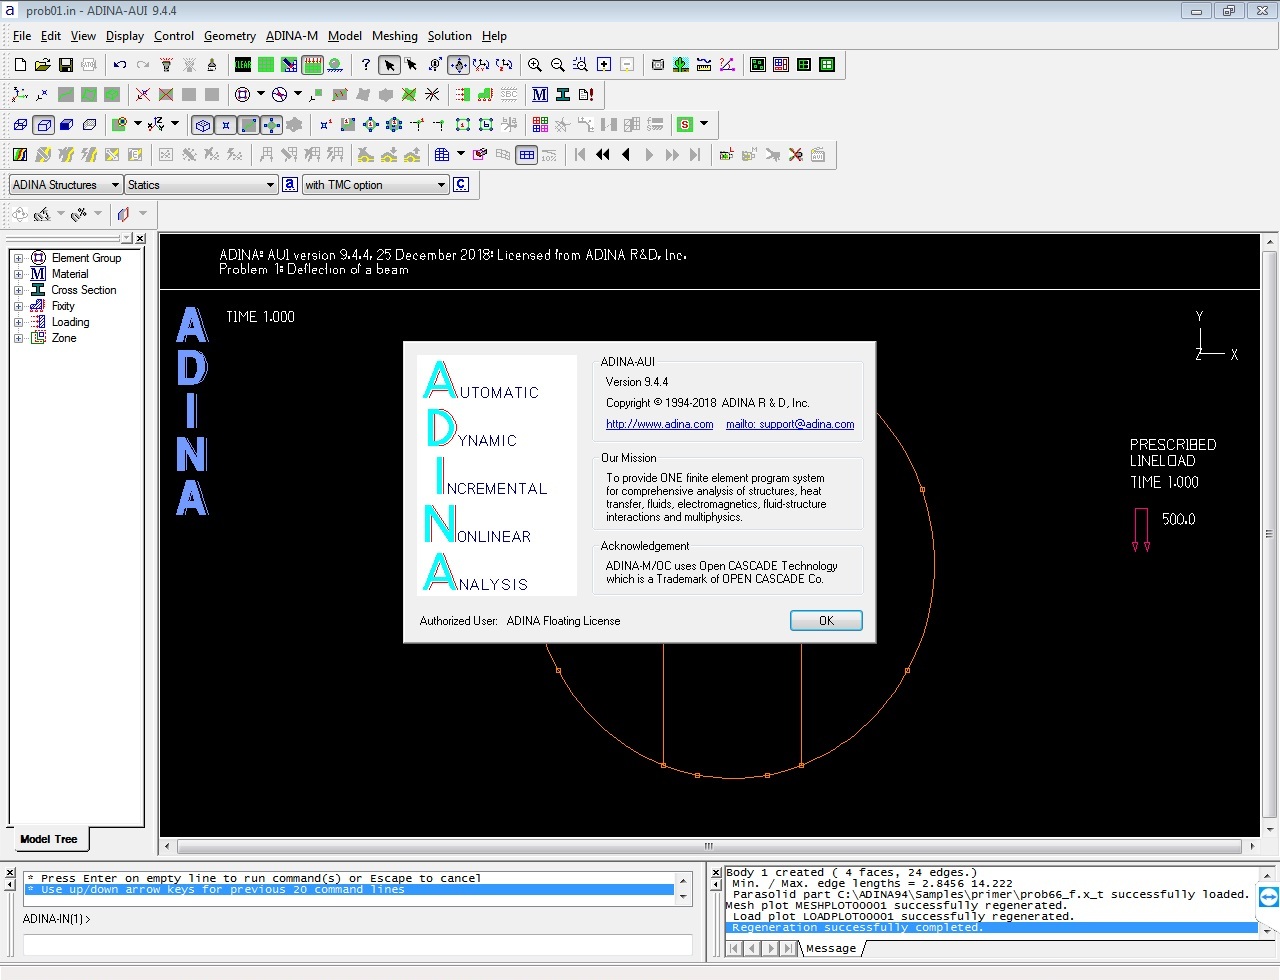 Working with ADINA System 9.4.4 full license